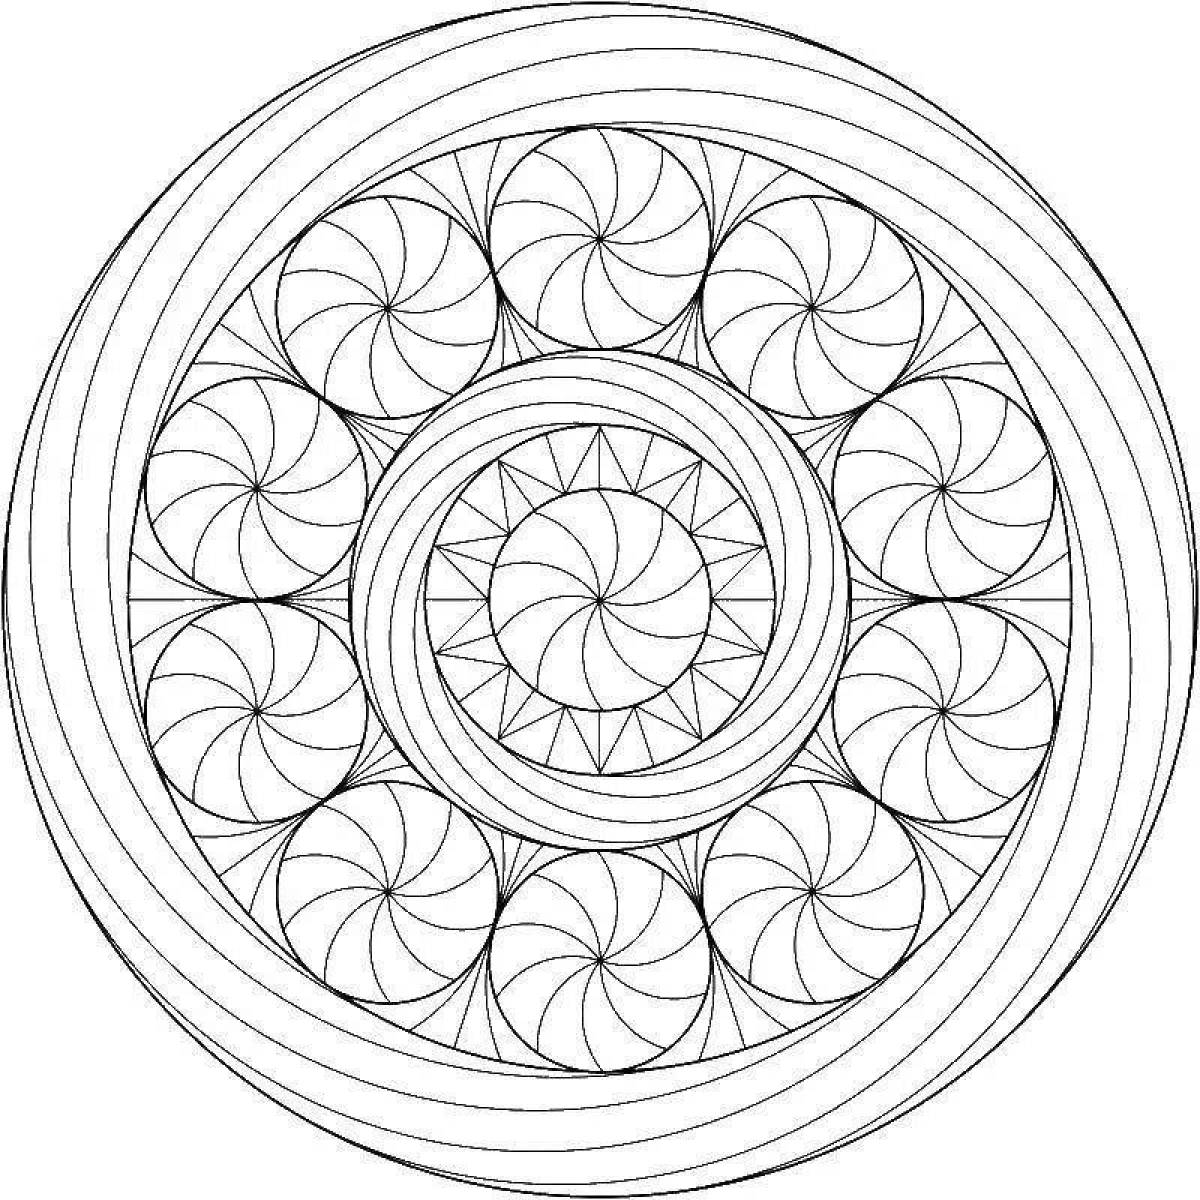 Coloring page blissful circle of life